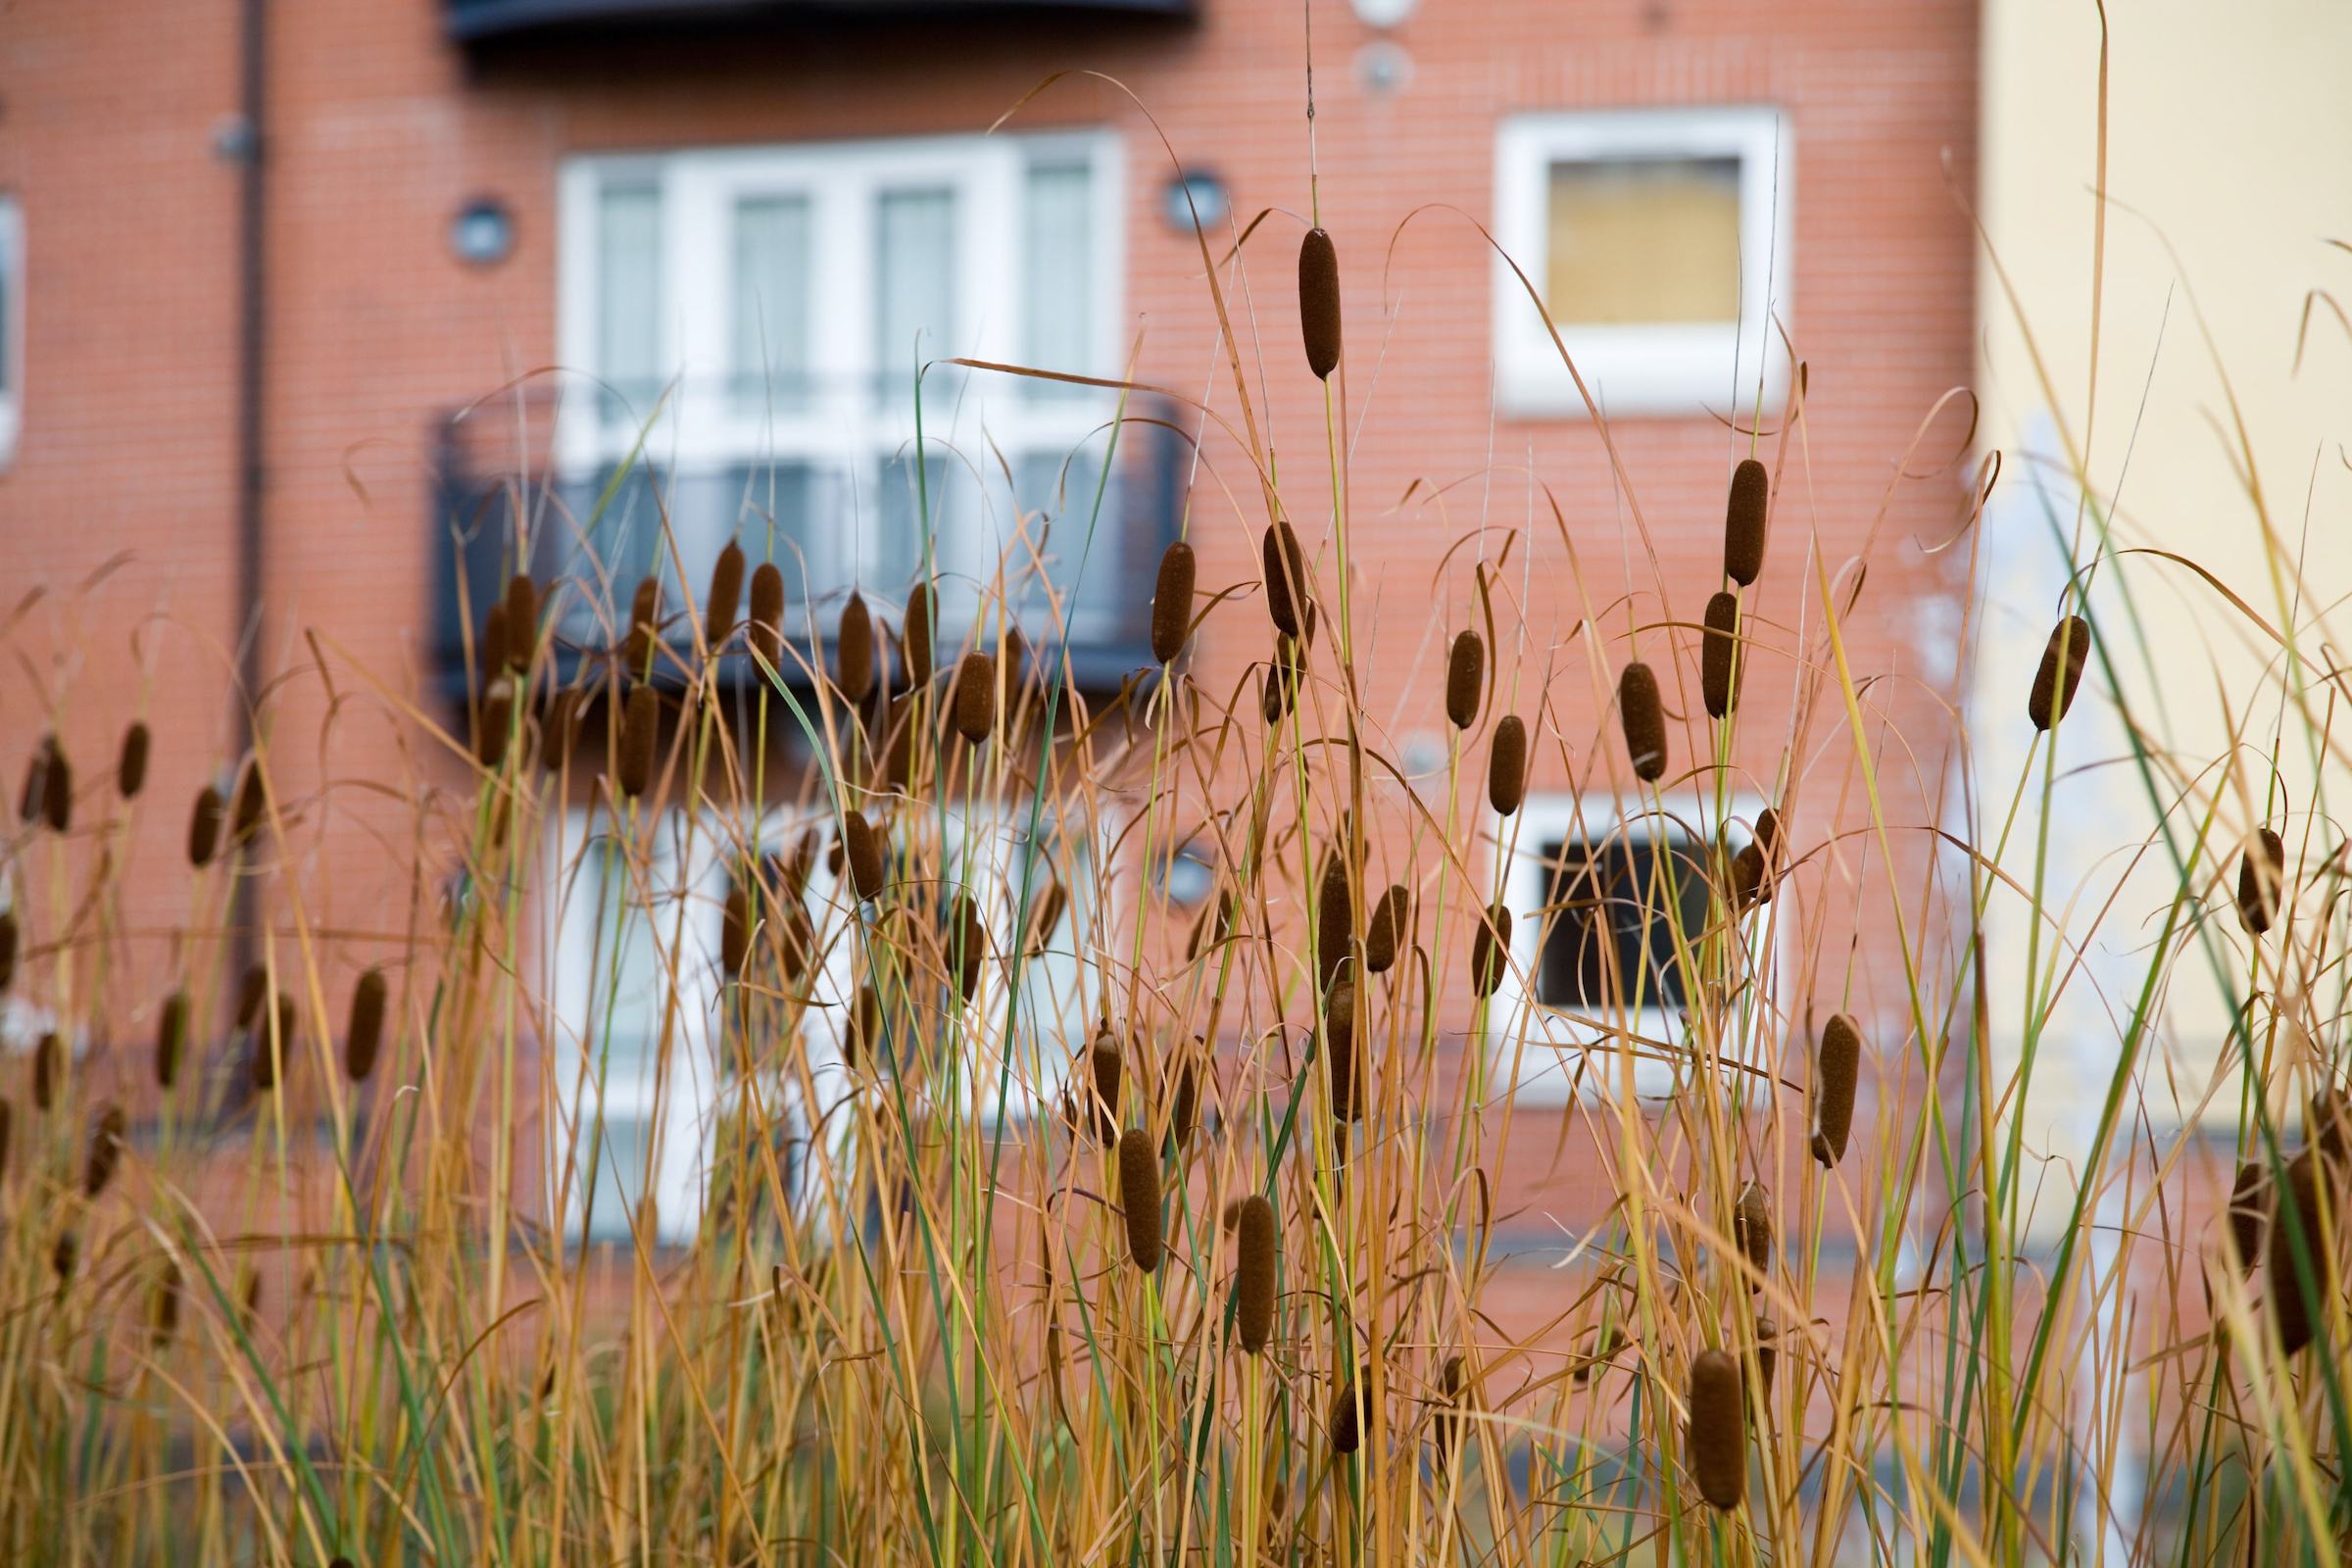 A building with a balcony, viewed through some bulrushes.